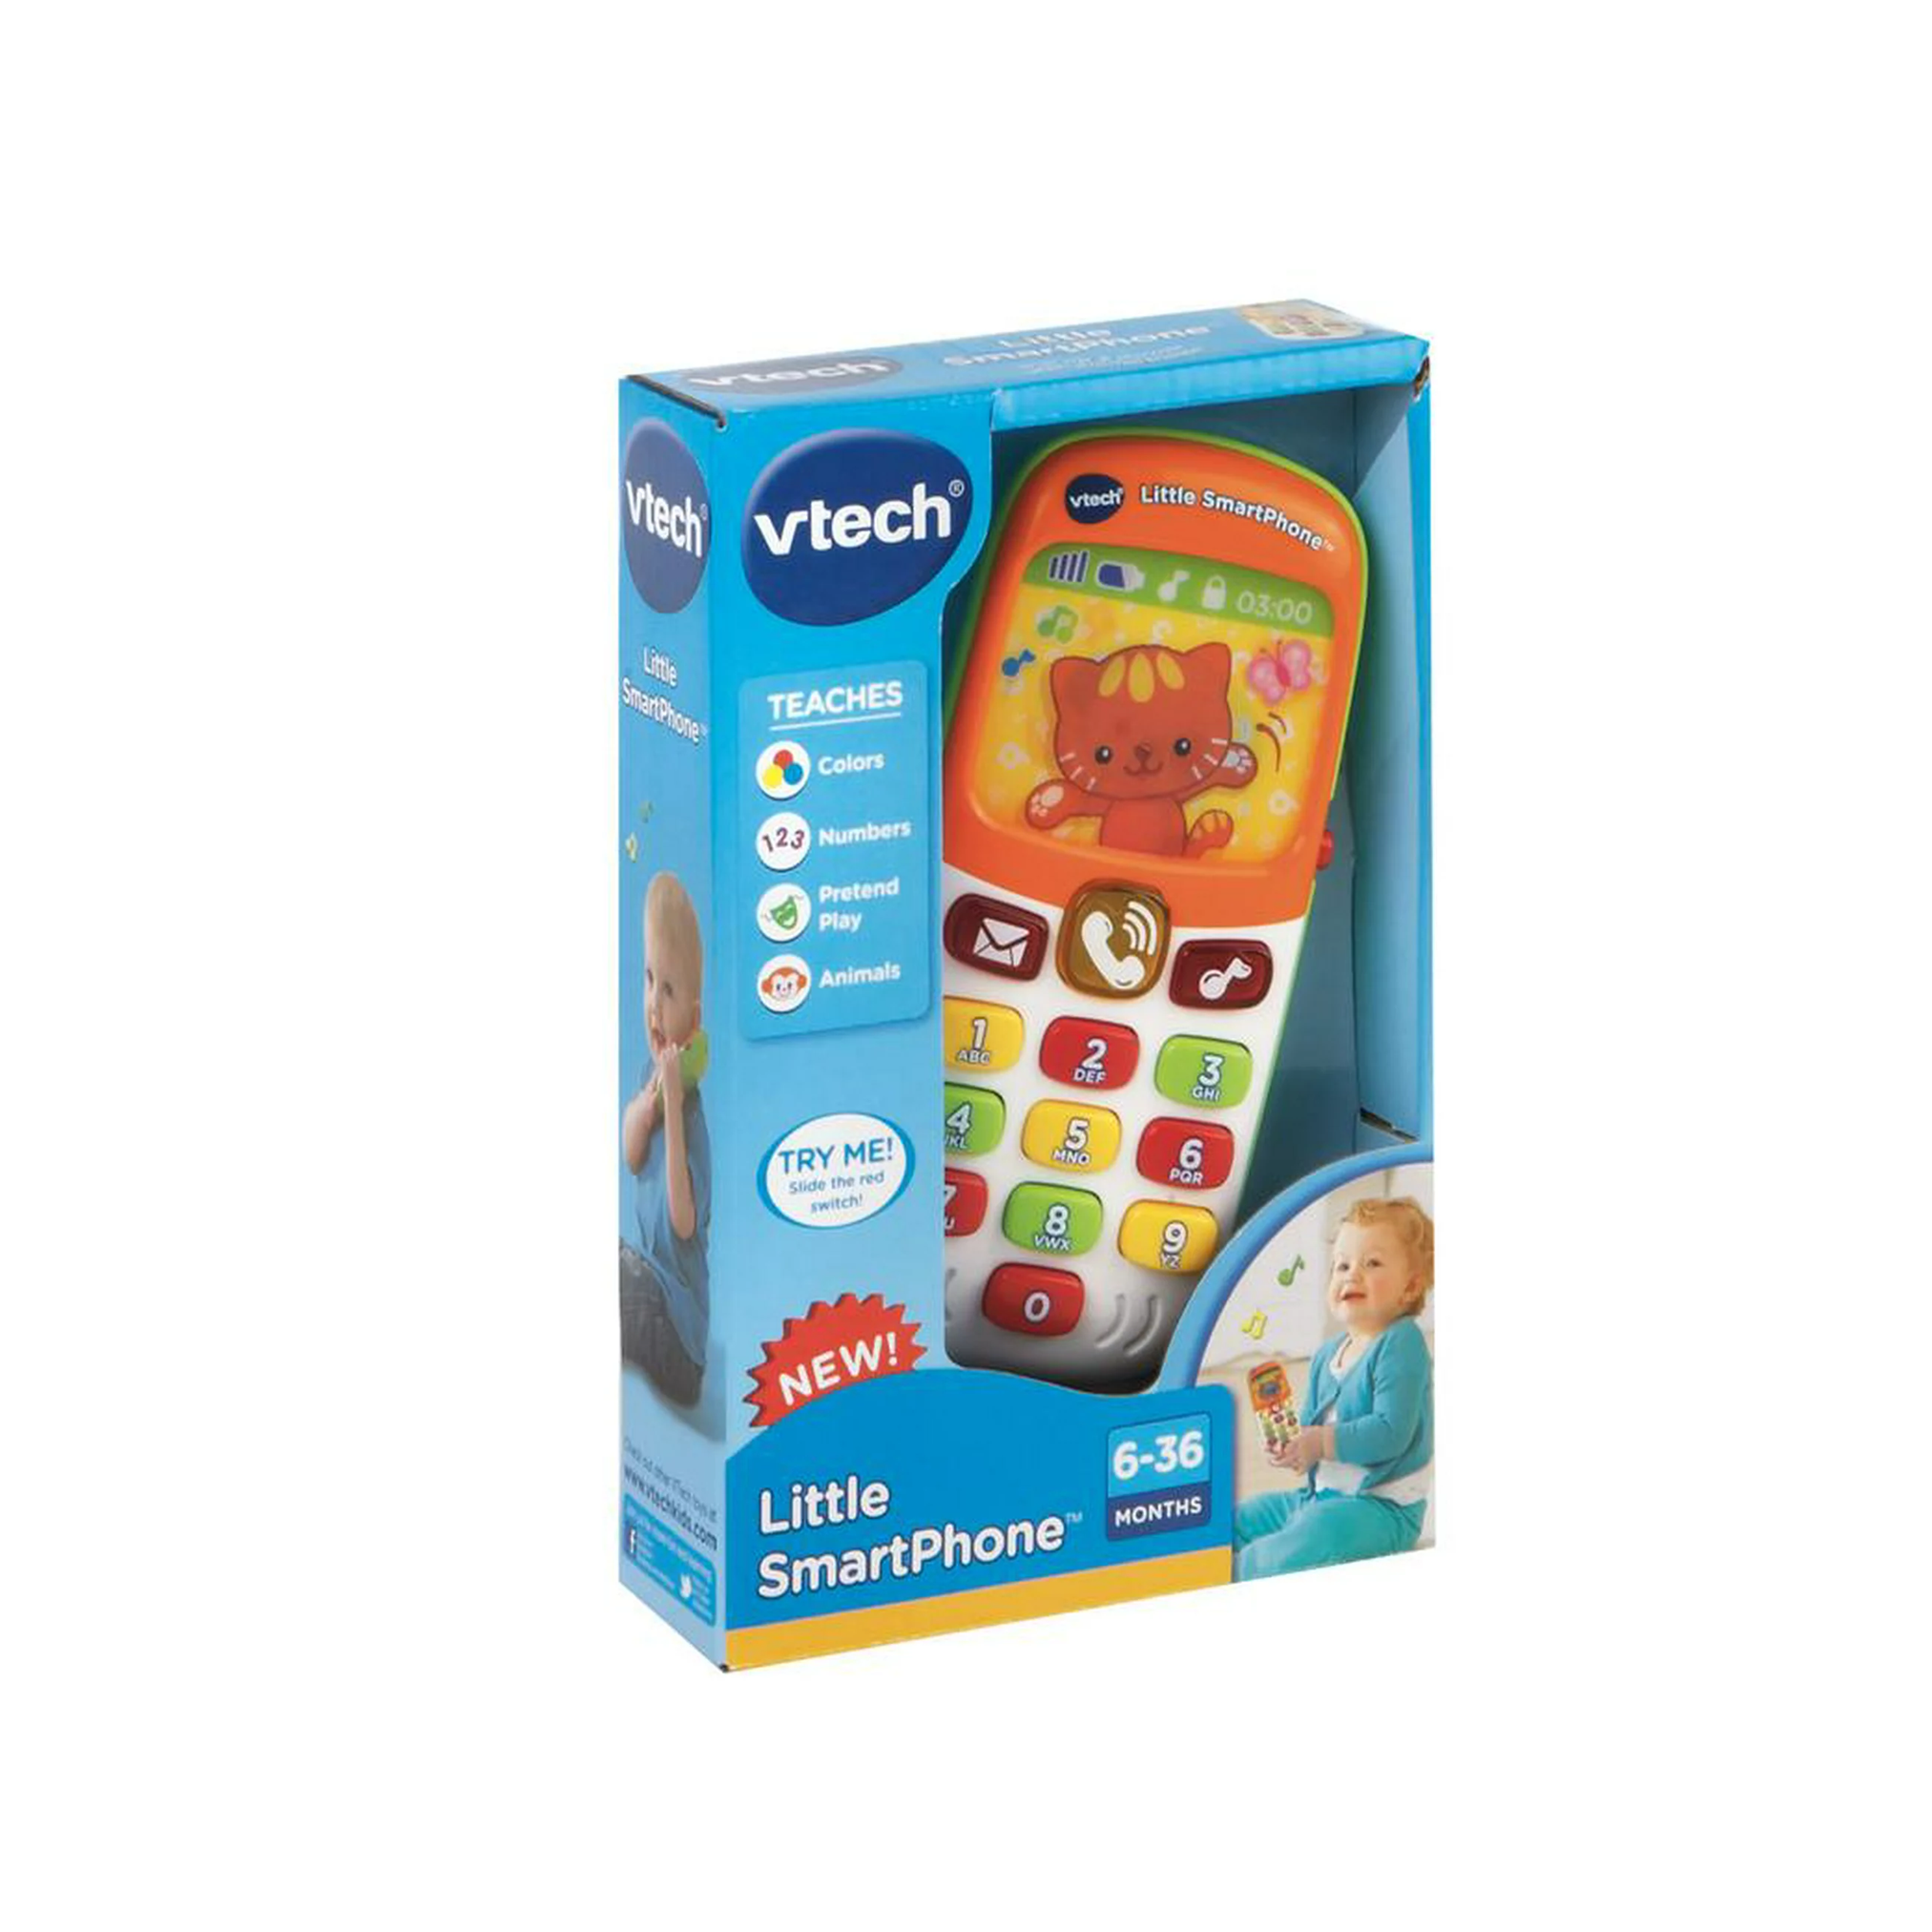 VTech Little SmartPhone Baby Toy, 6-36 Months, Teaches Numbers, Colors,  Walmart Exclusive